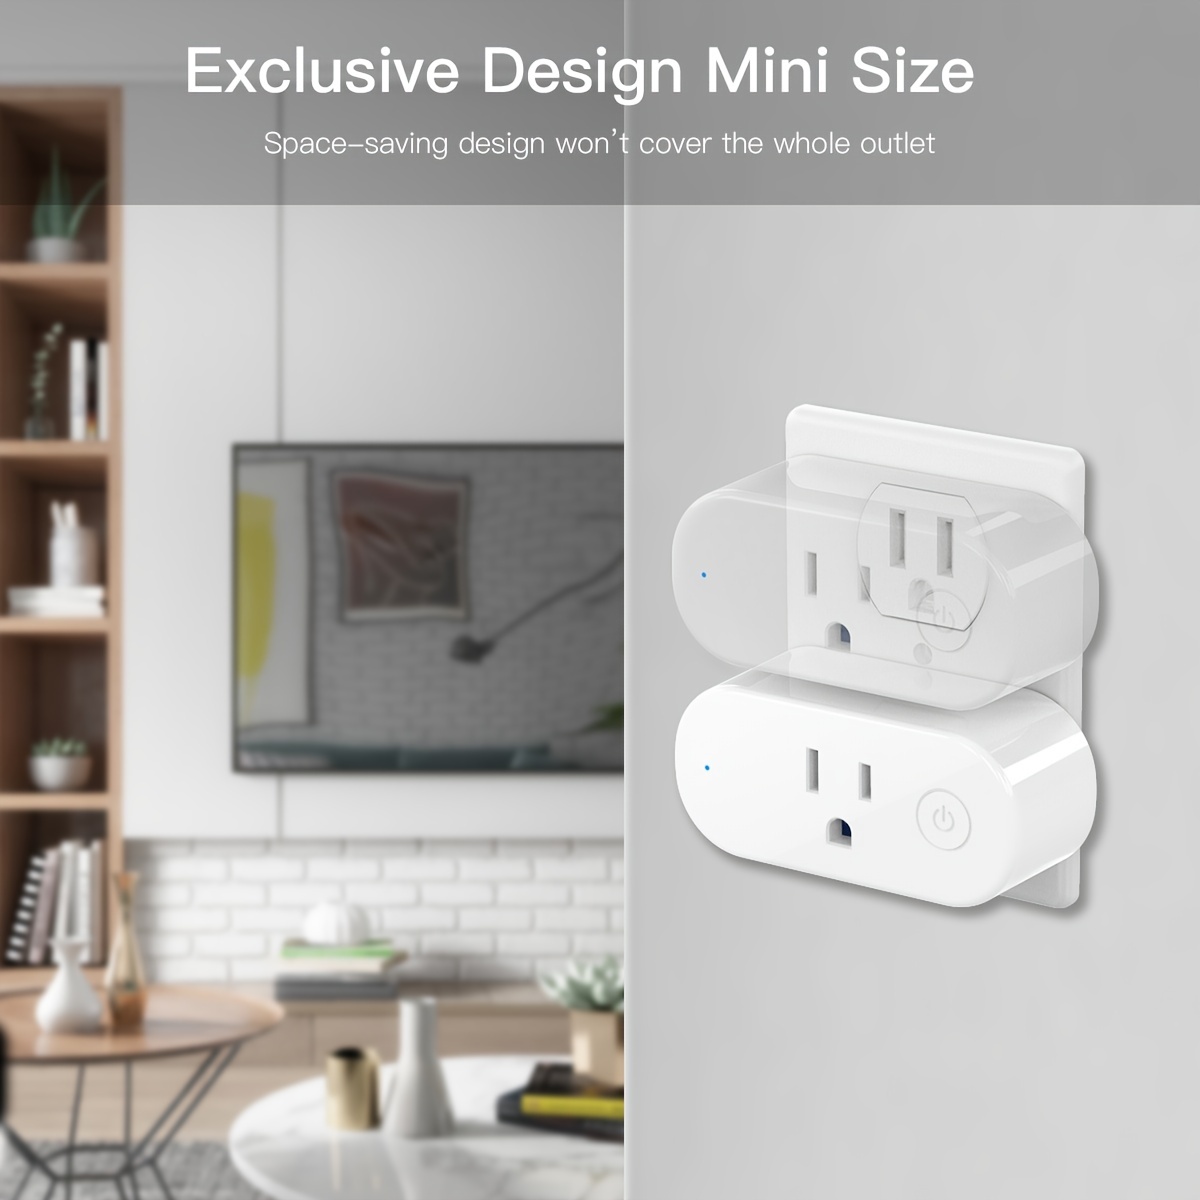 Energy Monitoring Smart Socket - Save Money with Our Store